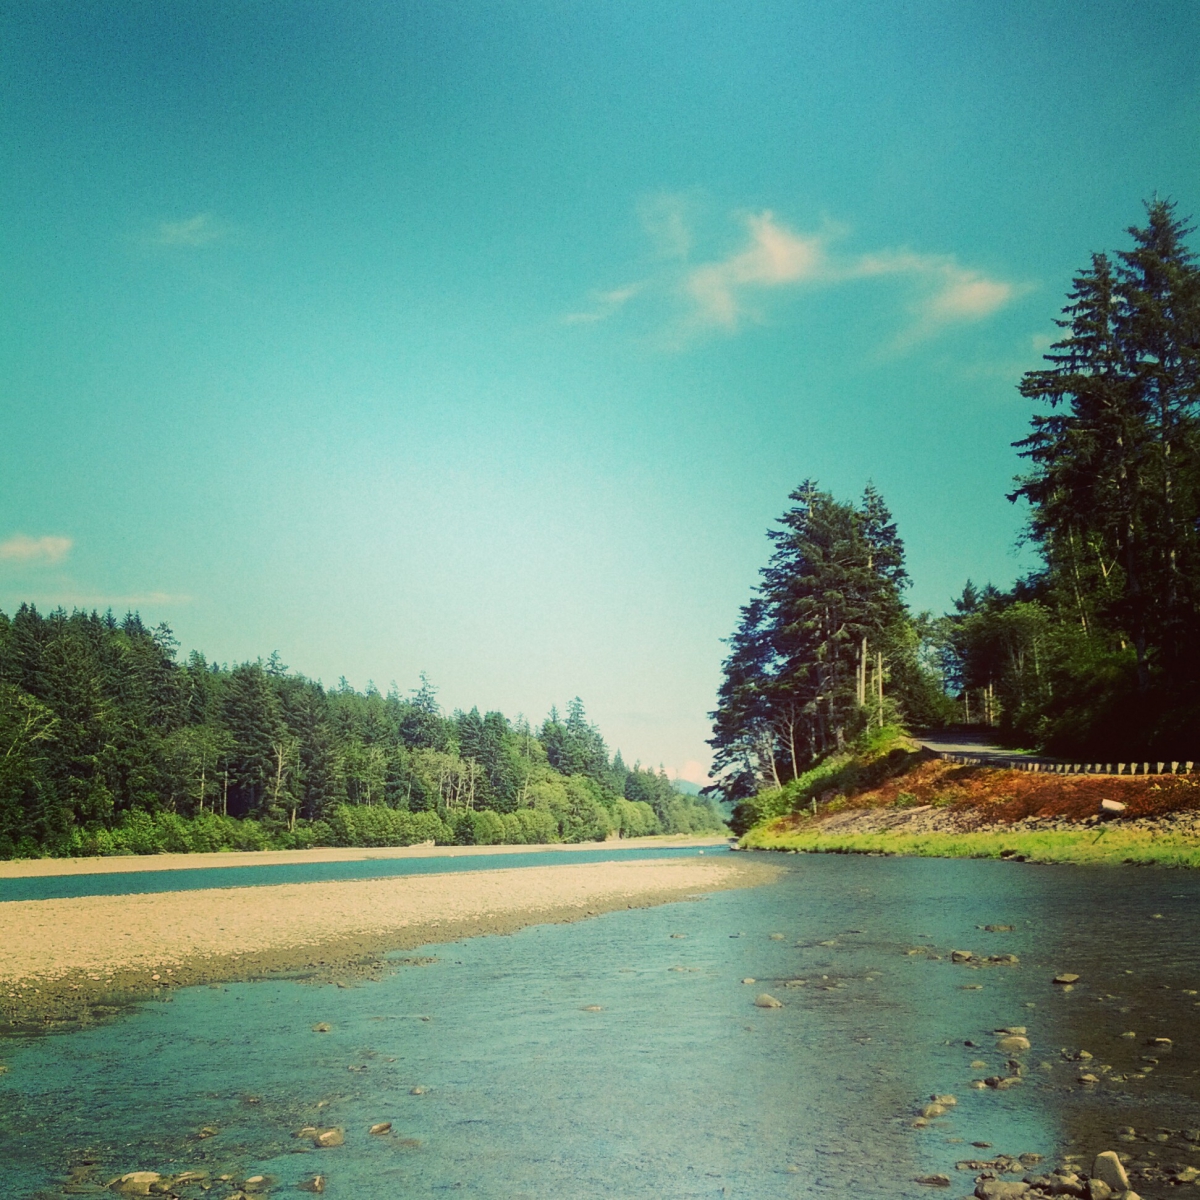 Hoh River, looking downstream from the delta. Pacific Ocean inlet.